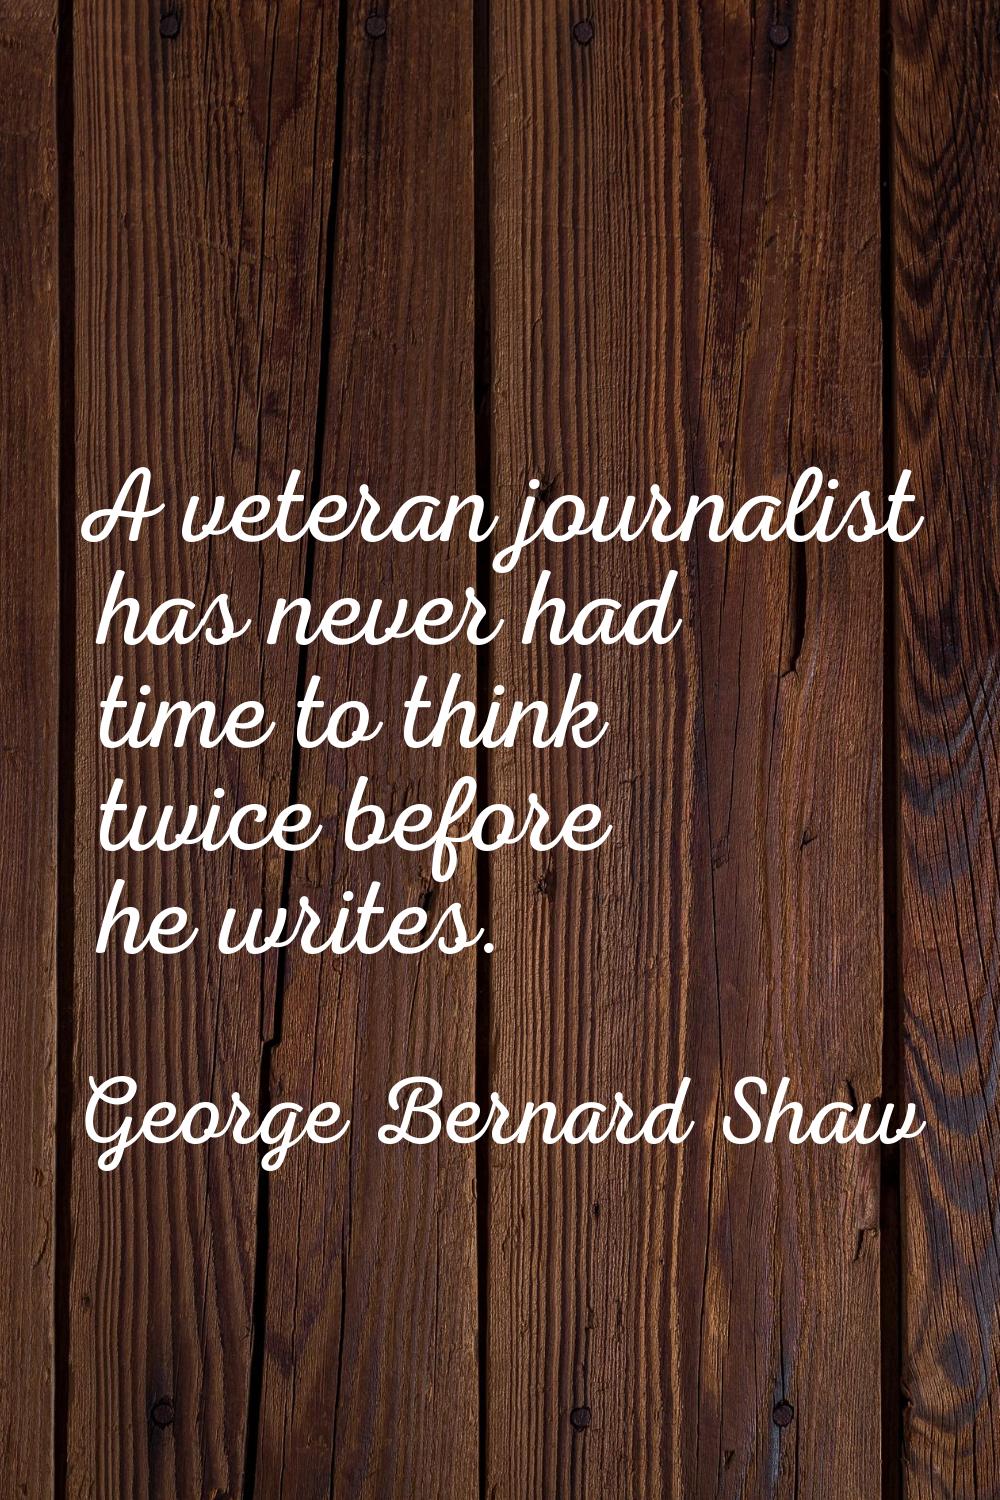 A veteran journalist has never had time to think twice before he writes.